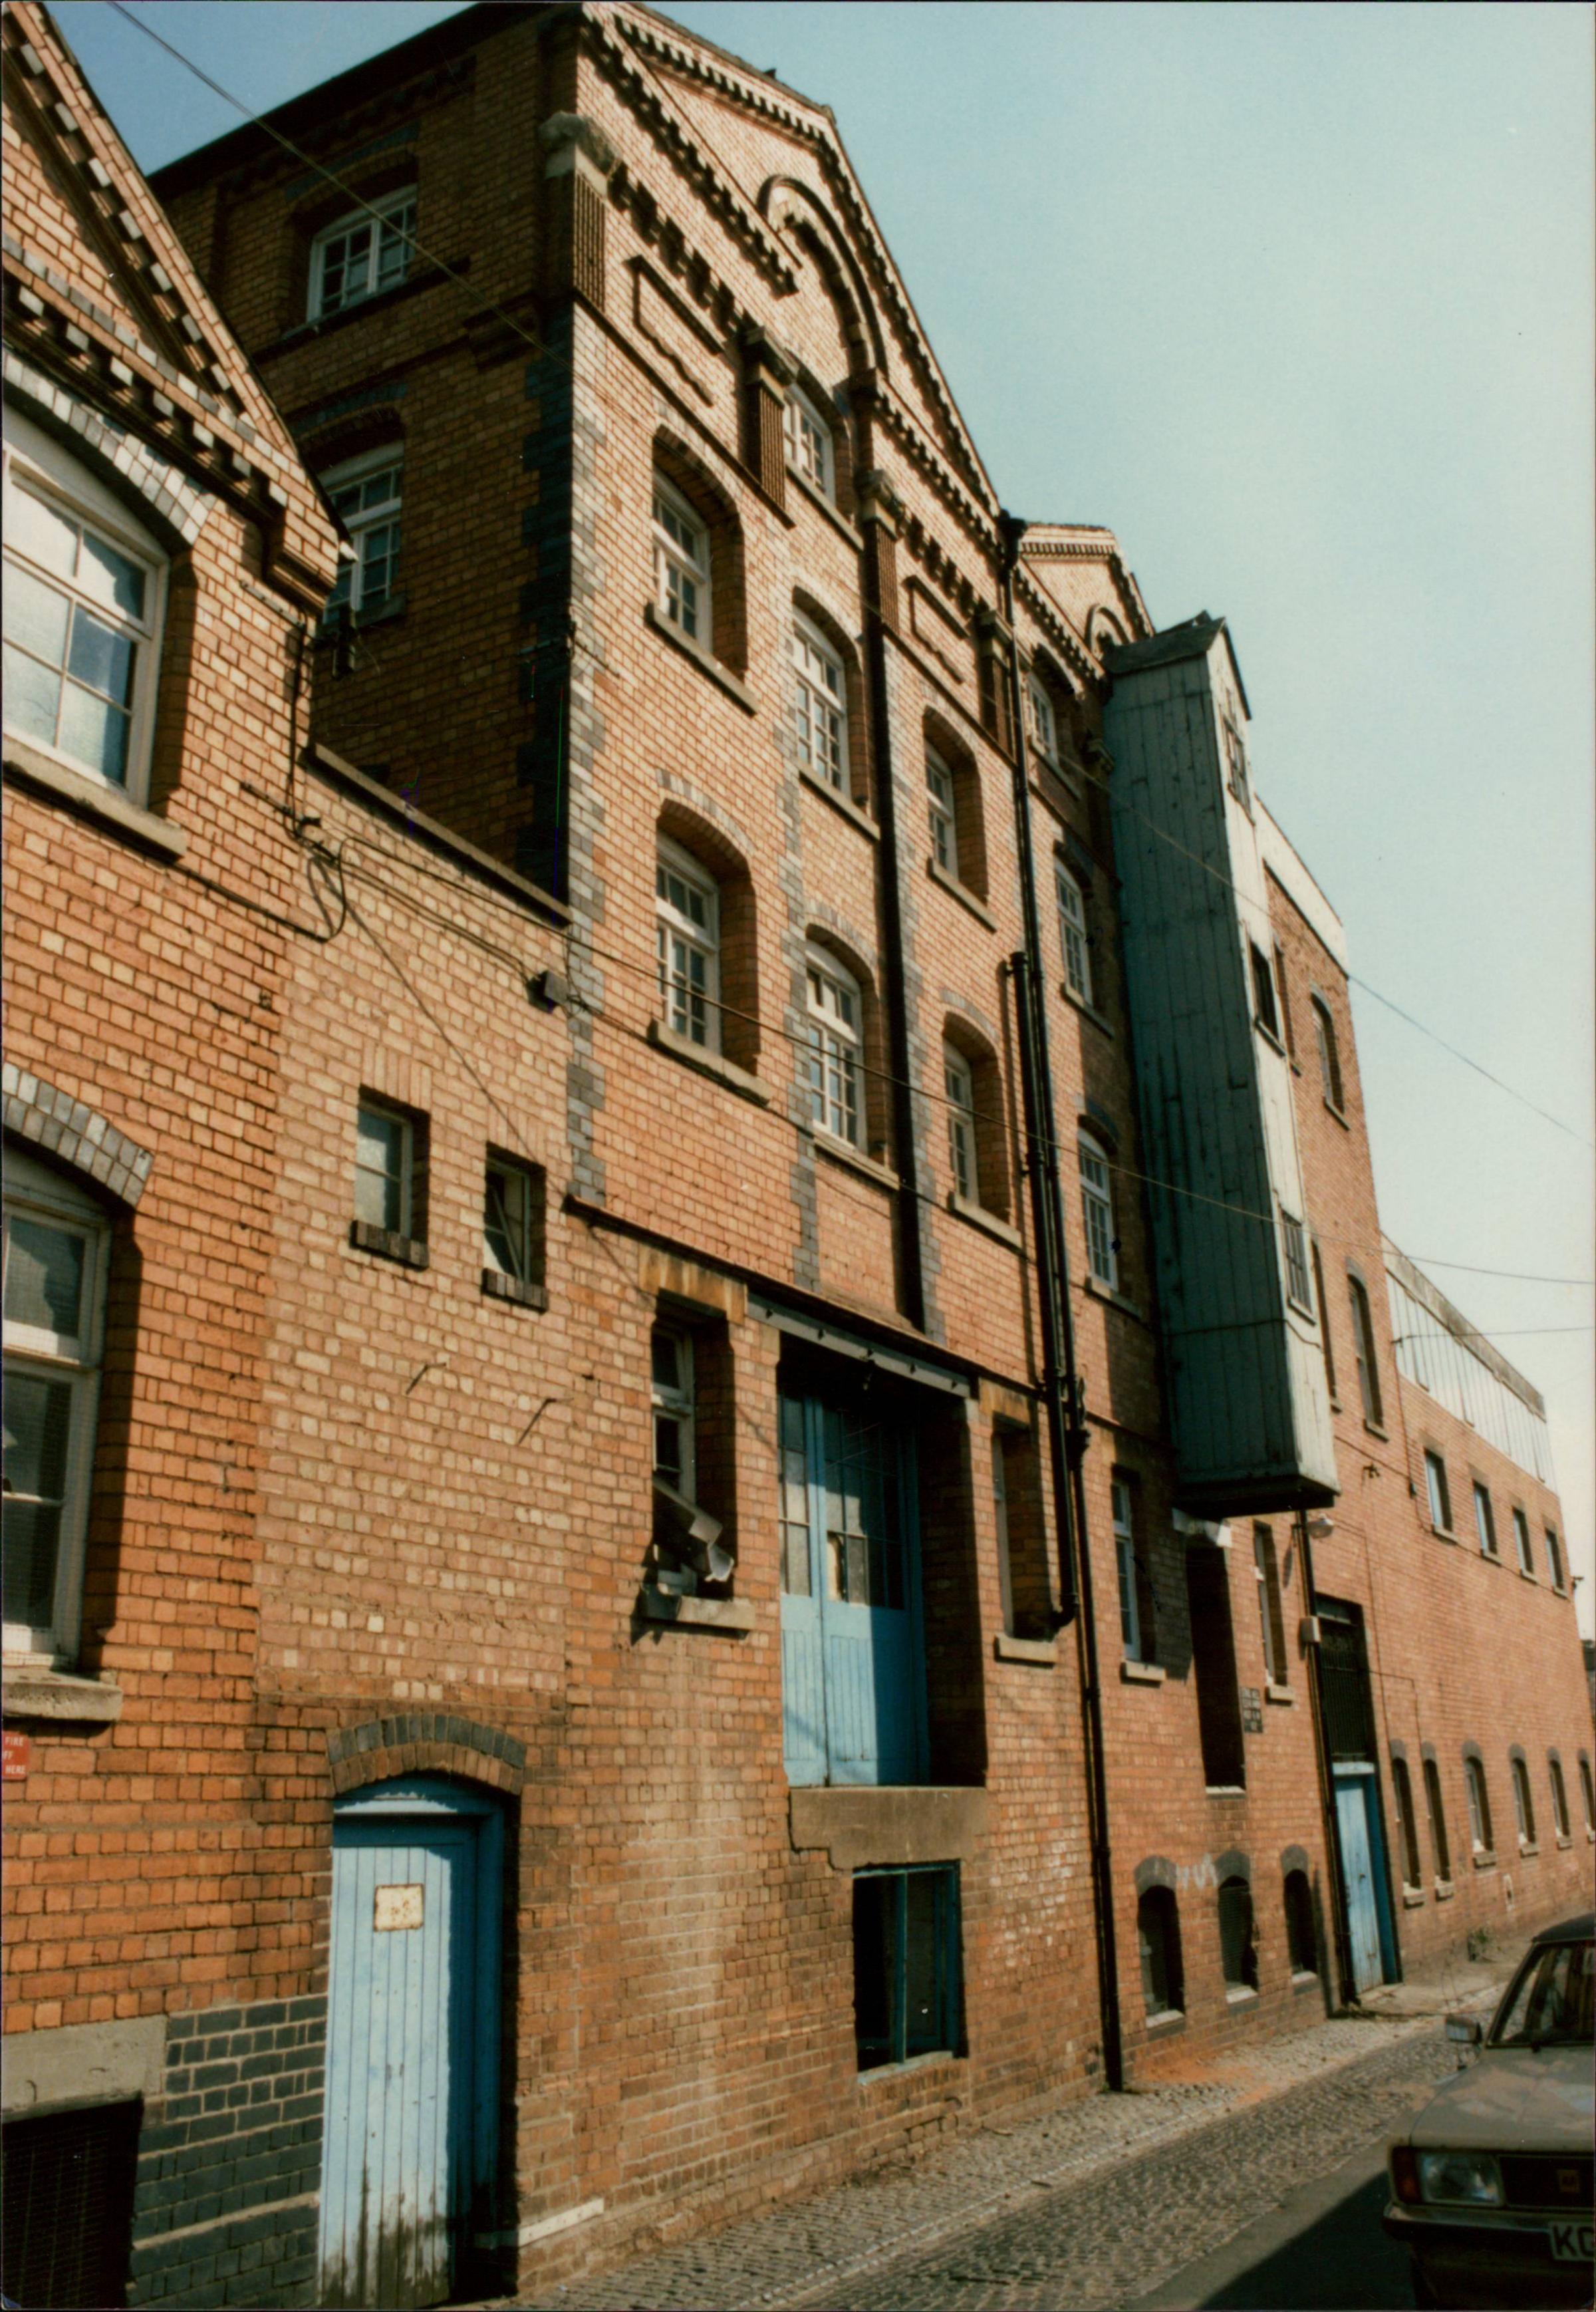 Barbourne Brewery in 1987 seen from the Northcote Street frontage